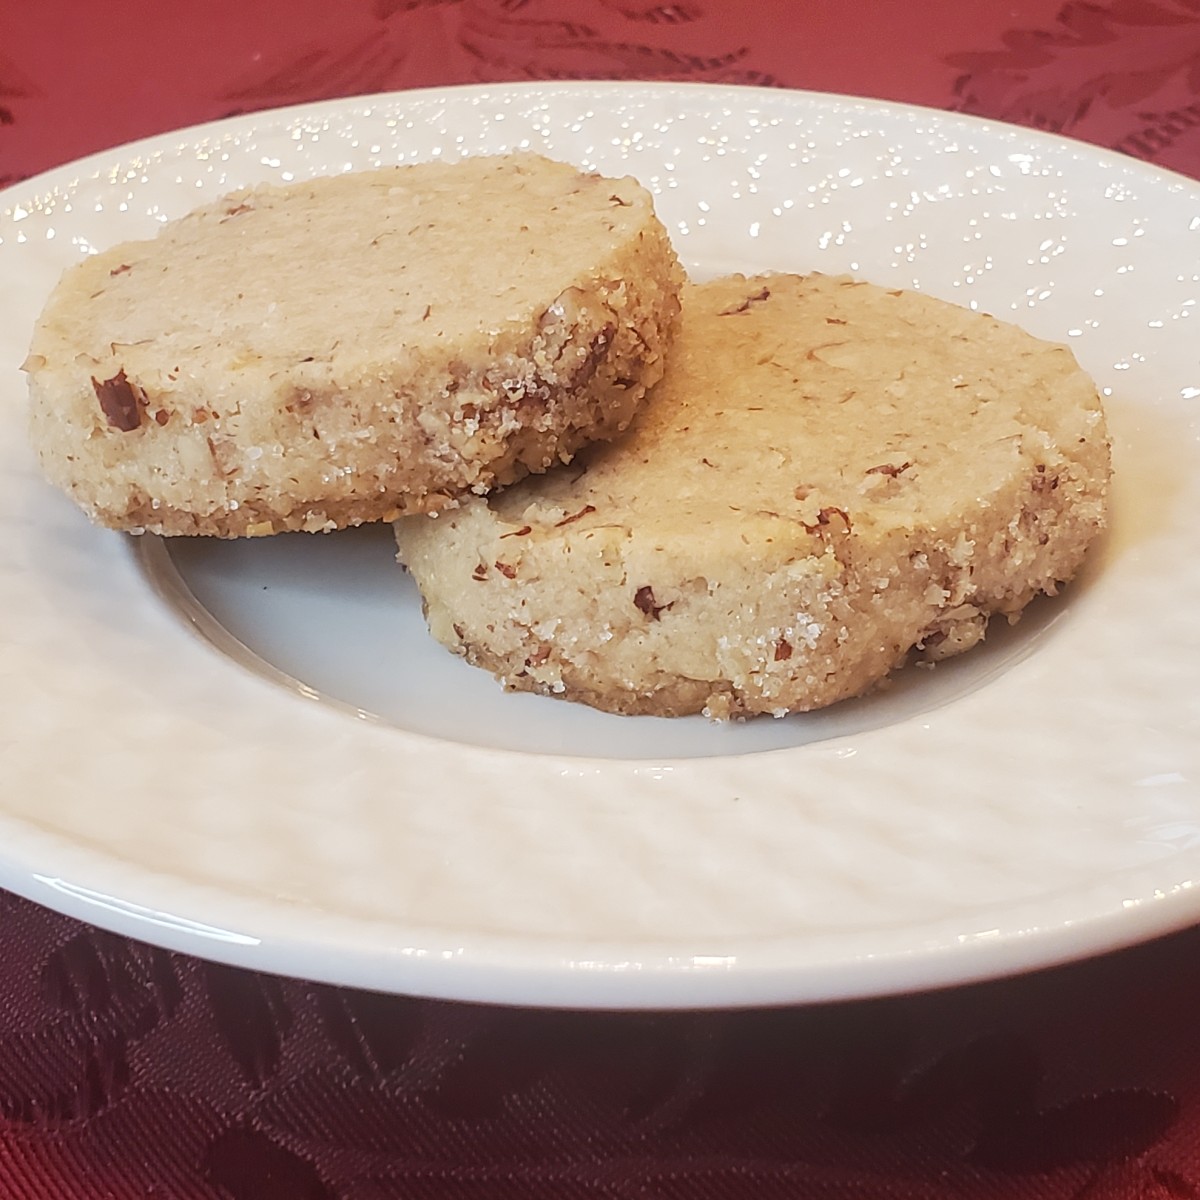 Pecan shortbread recipe from cleveland cooking.com